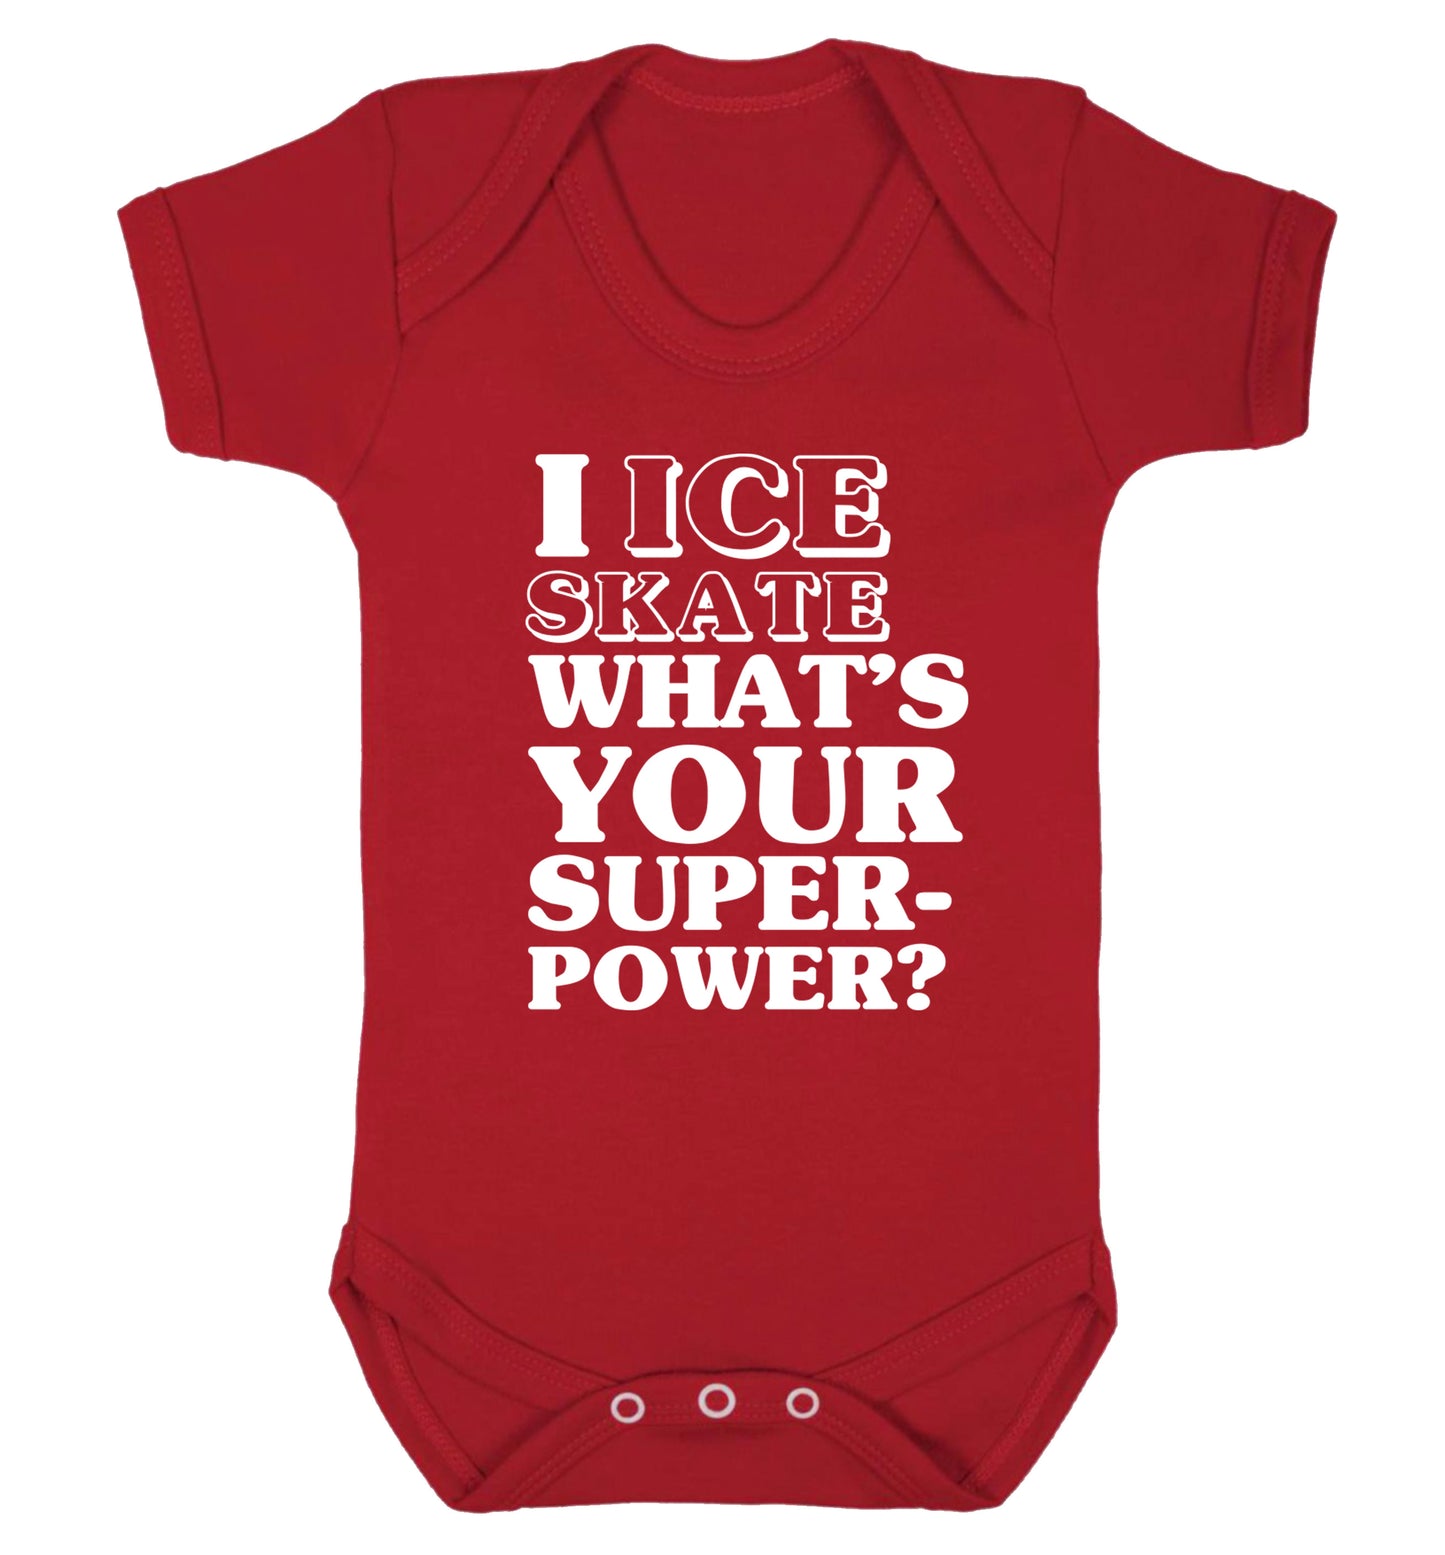 I ice skate what's your superpower? Baby Vest red 18-24 months